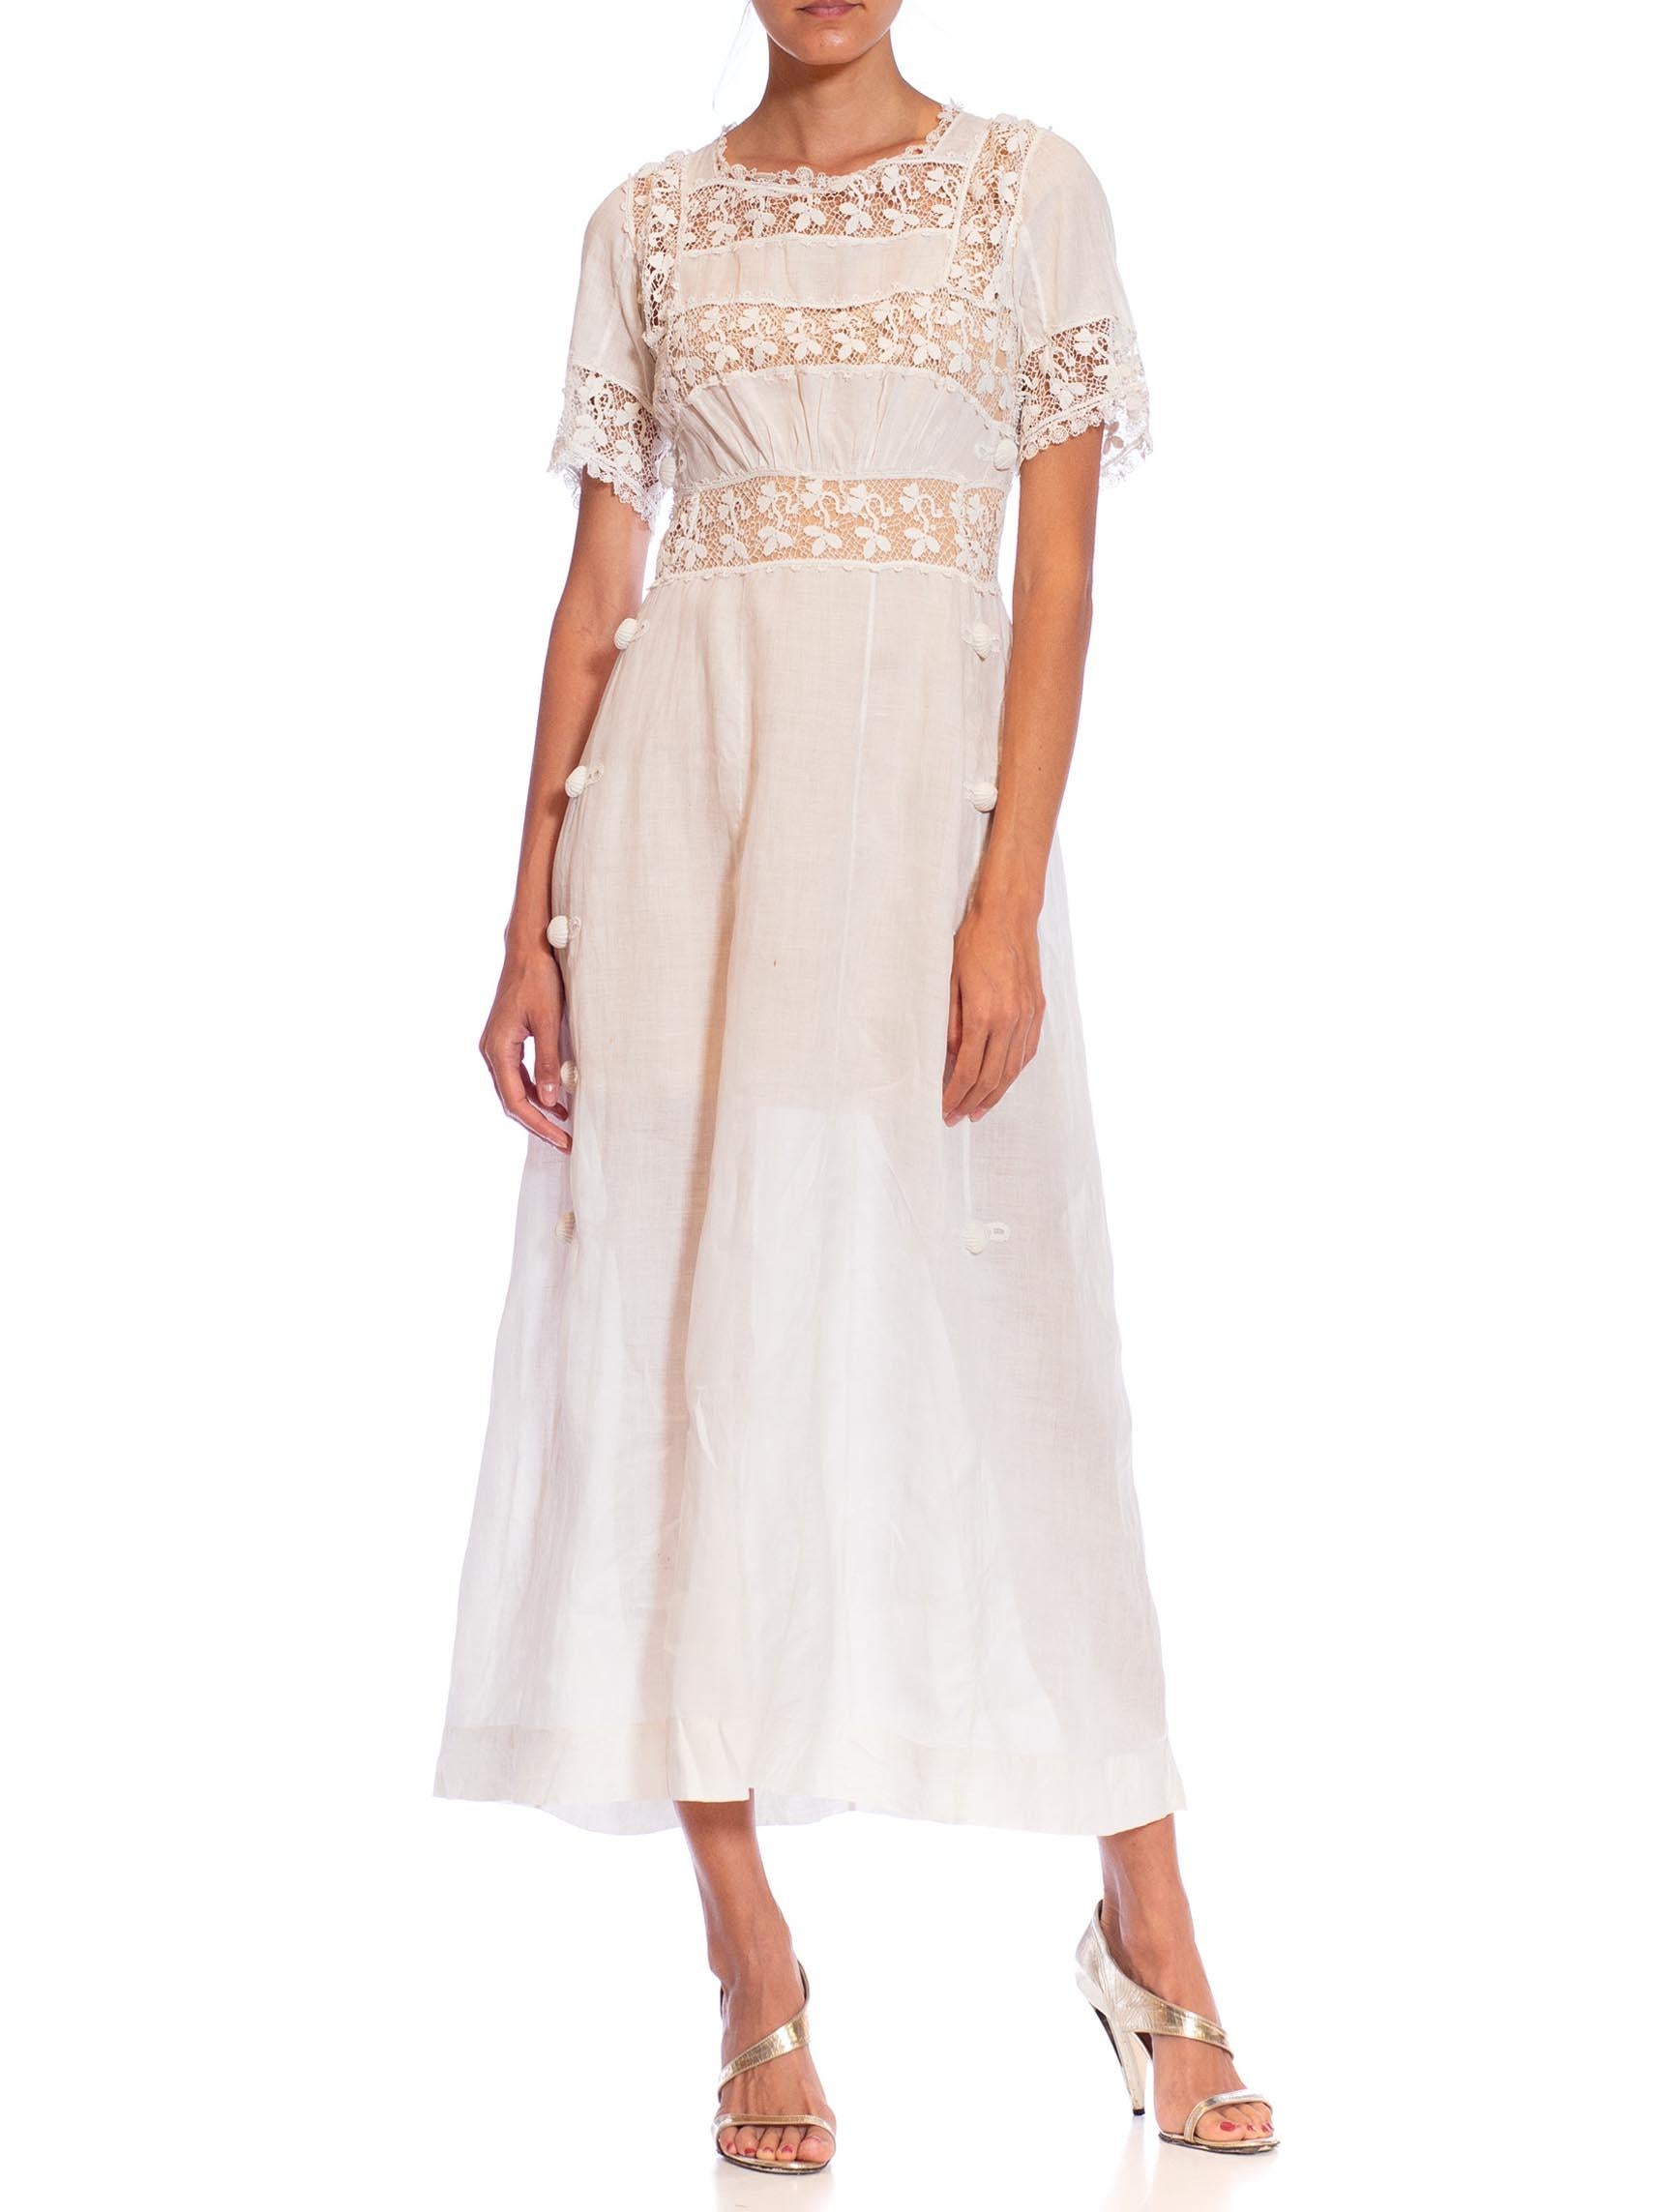 Edwardian White Linen & Lace Tea Dress With Sleeves For Sale 4